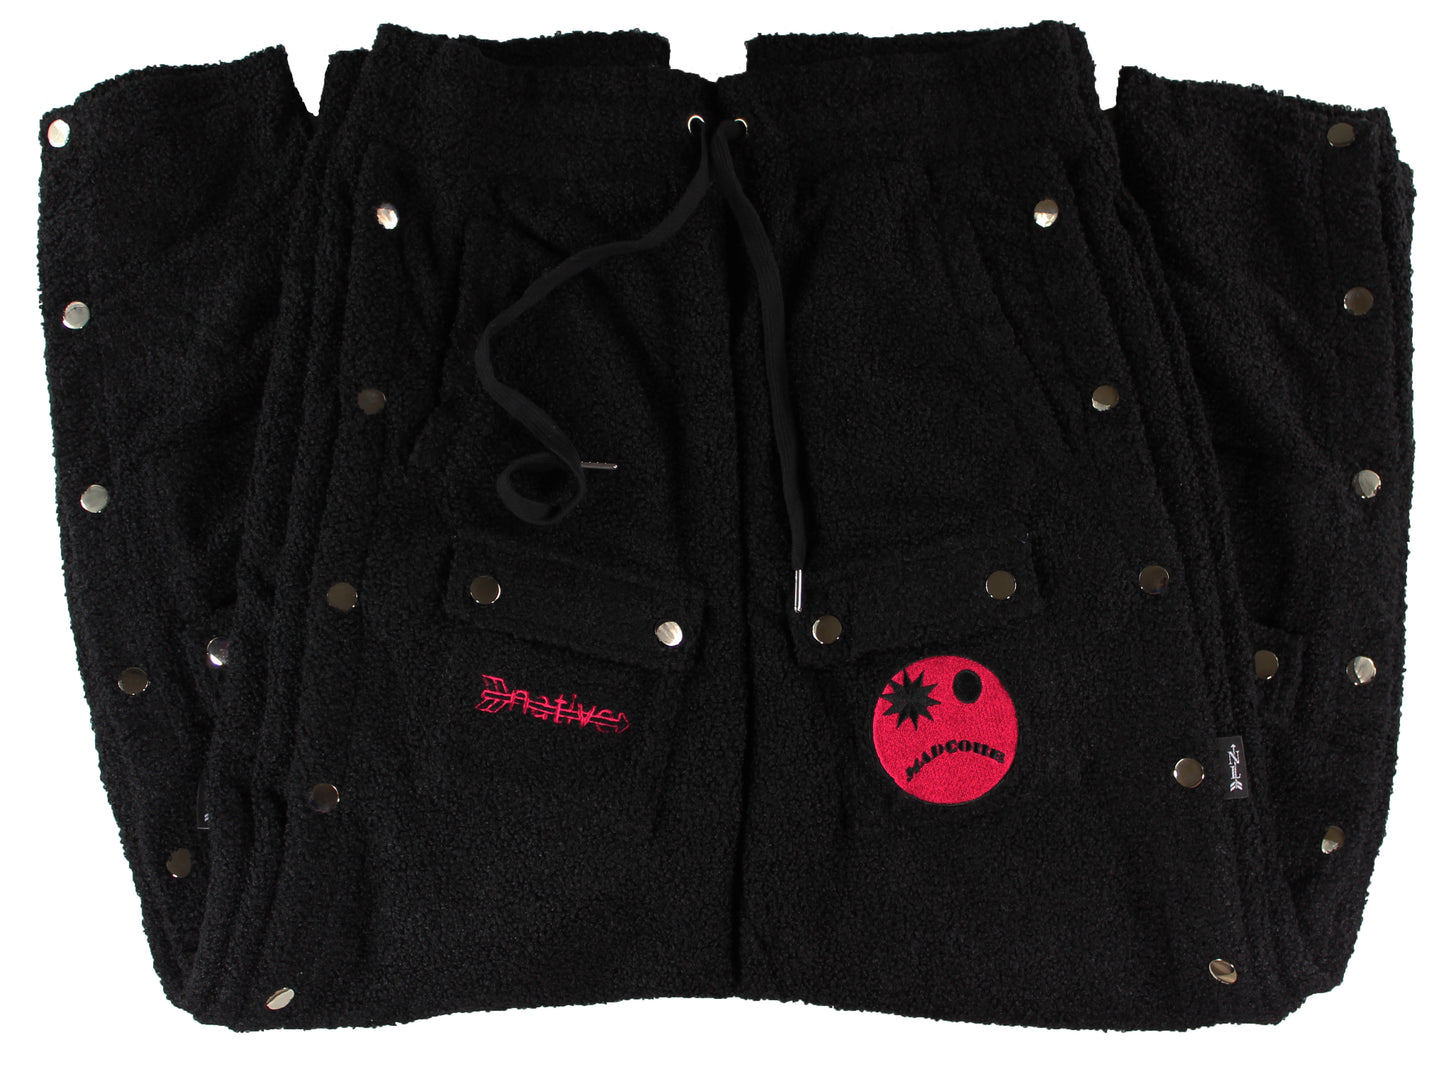 sherpa breakaway pants in black with madcore